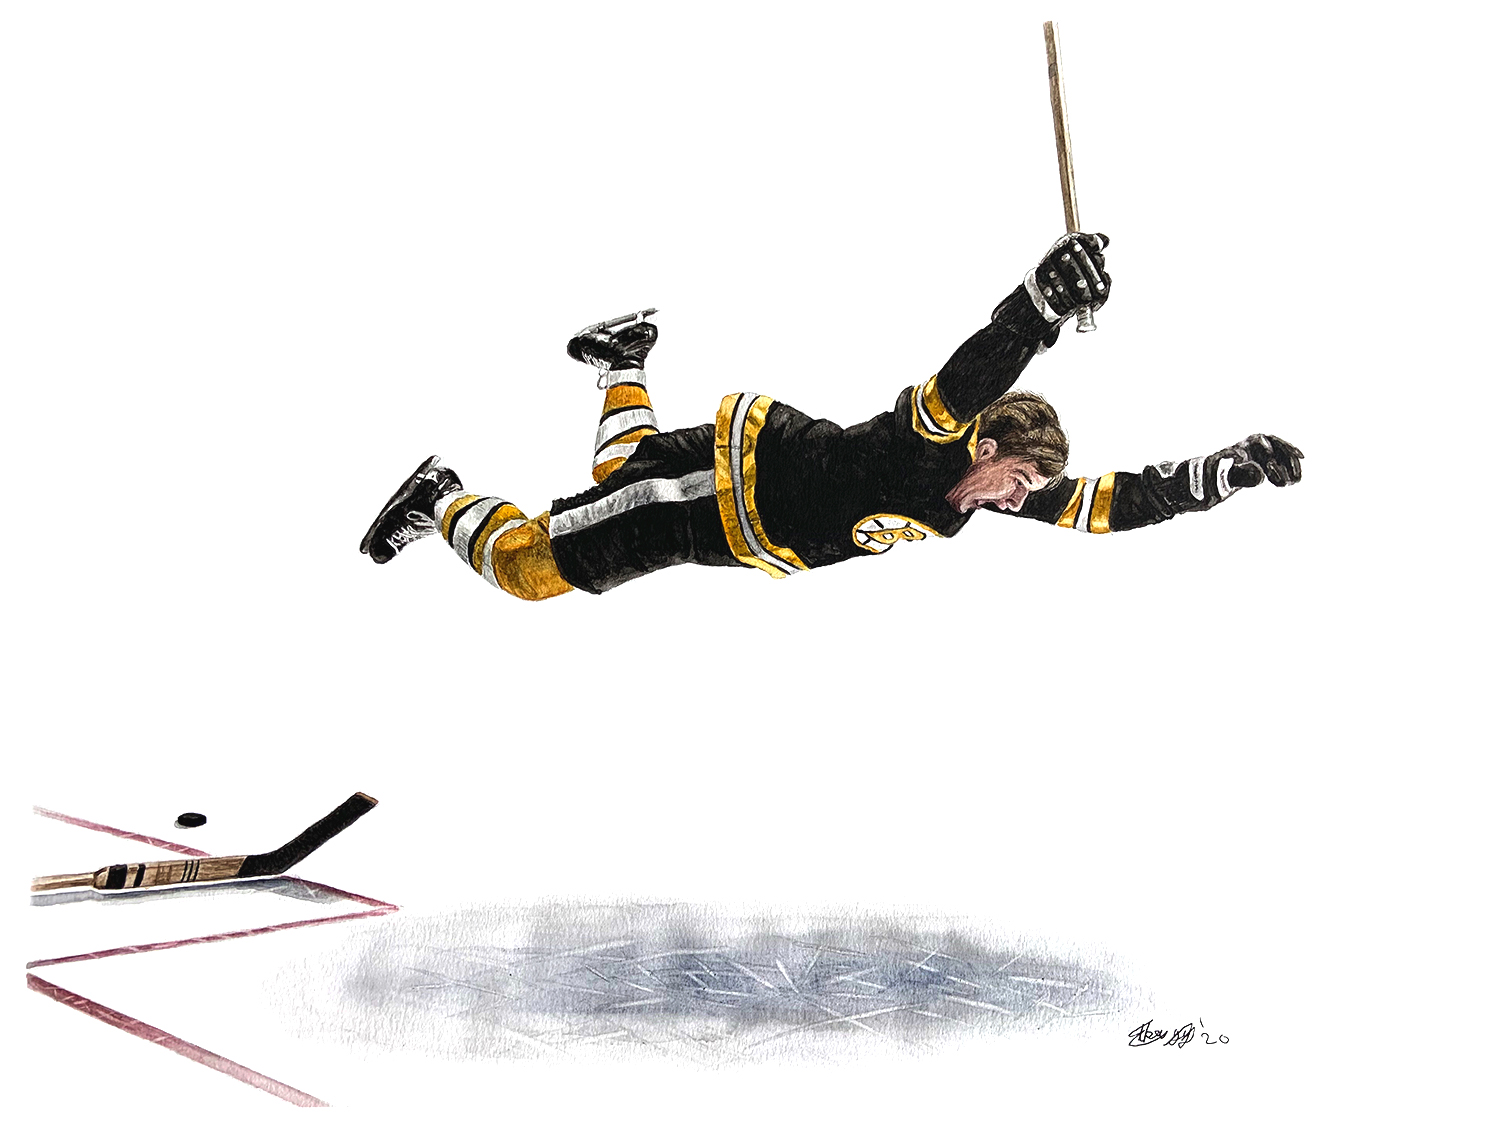 Photographer captures soaring Stanley Cup champion Bobby Orr in iconic image